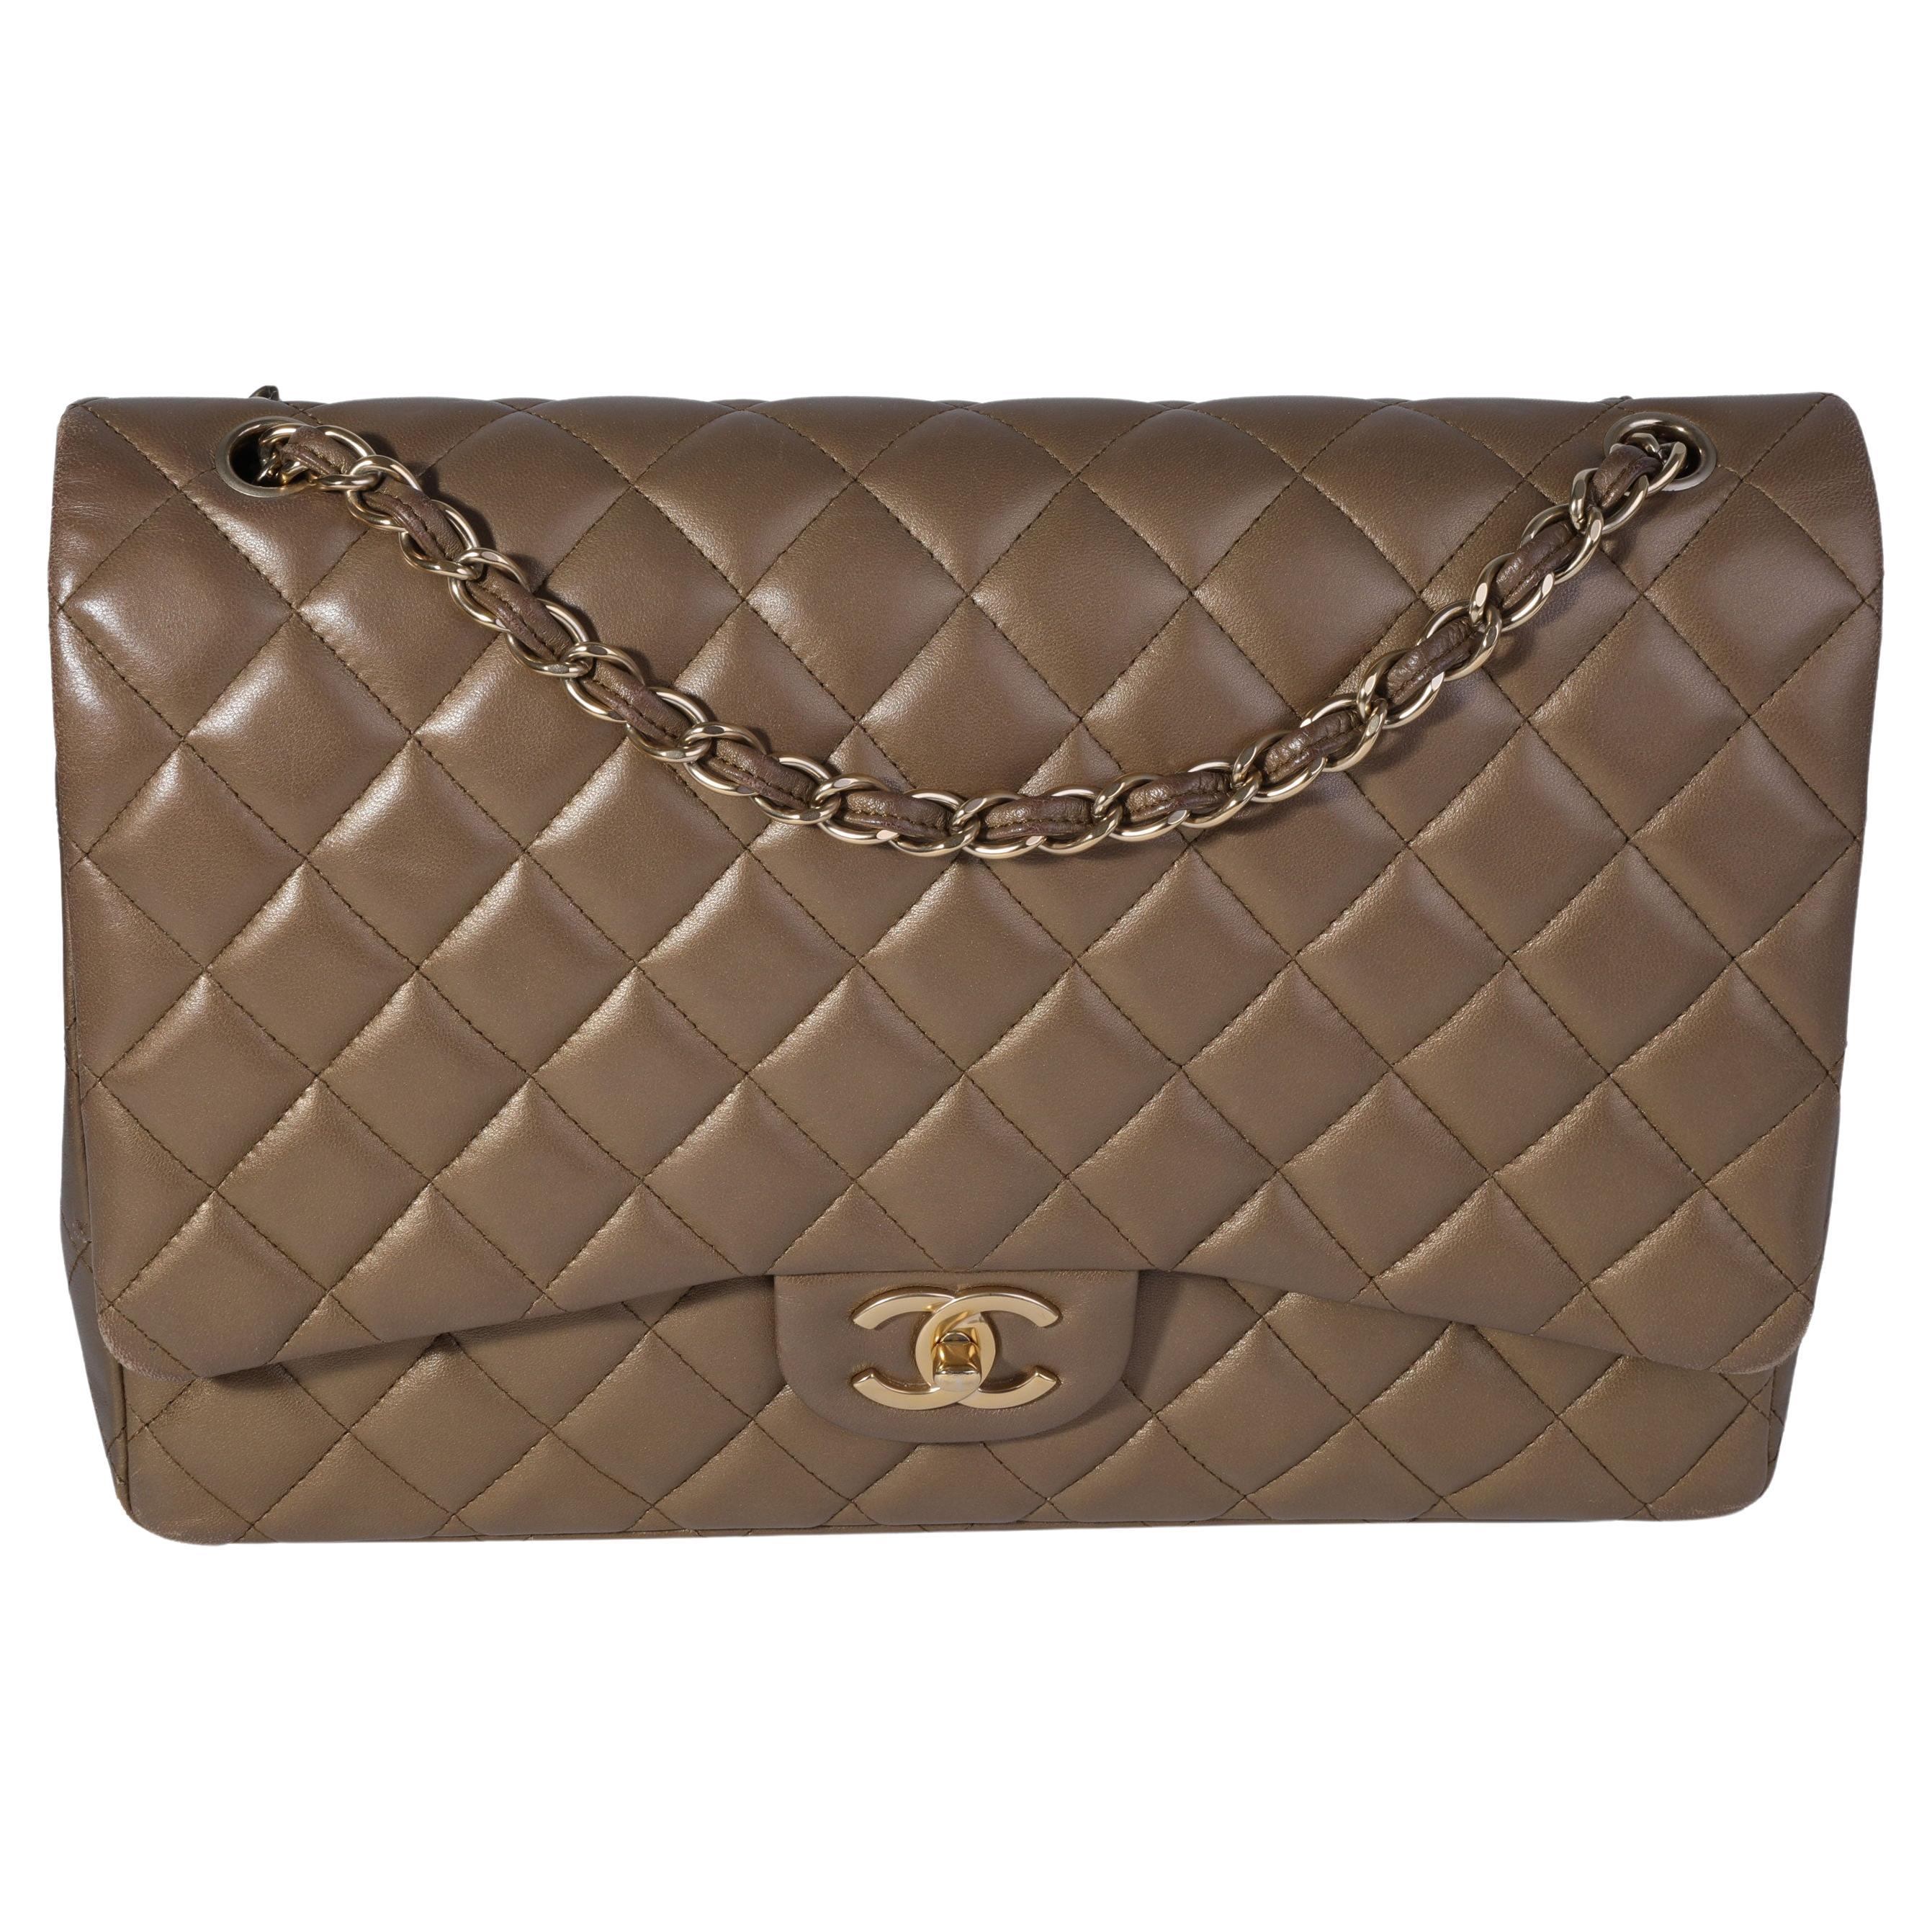 Cra-wallonieShops | Second Hand Chanel Bags Page 4 | buy marina volpe  italian leather shoulder bag